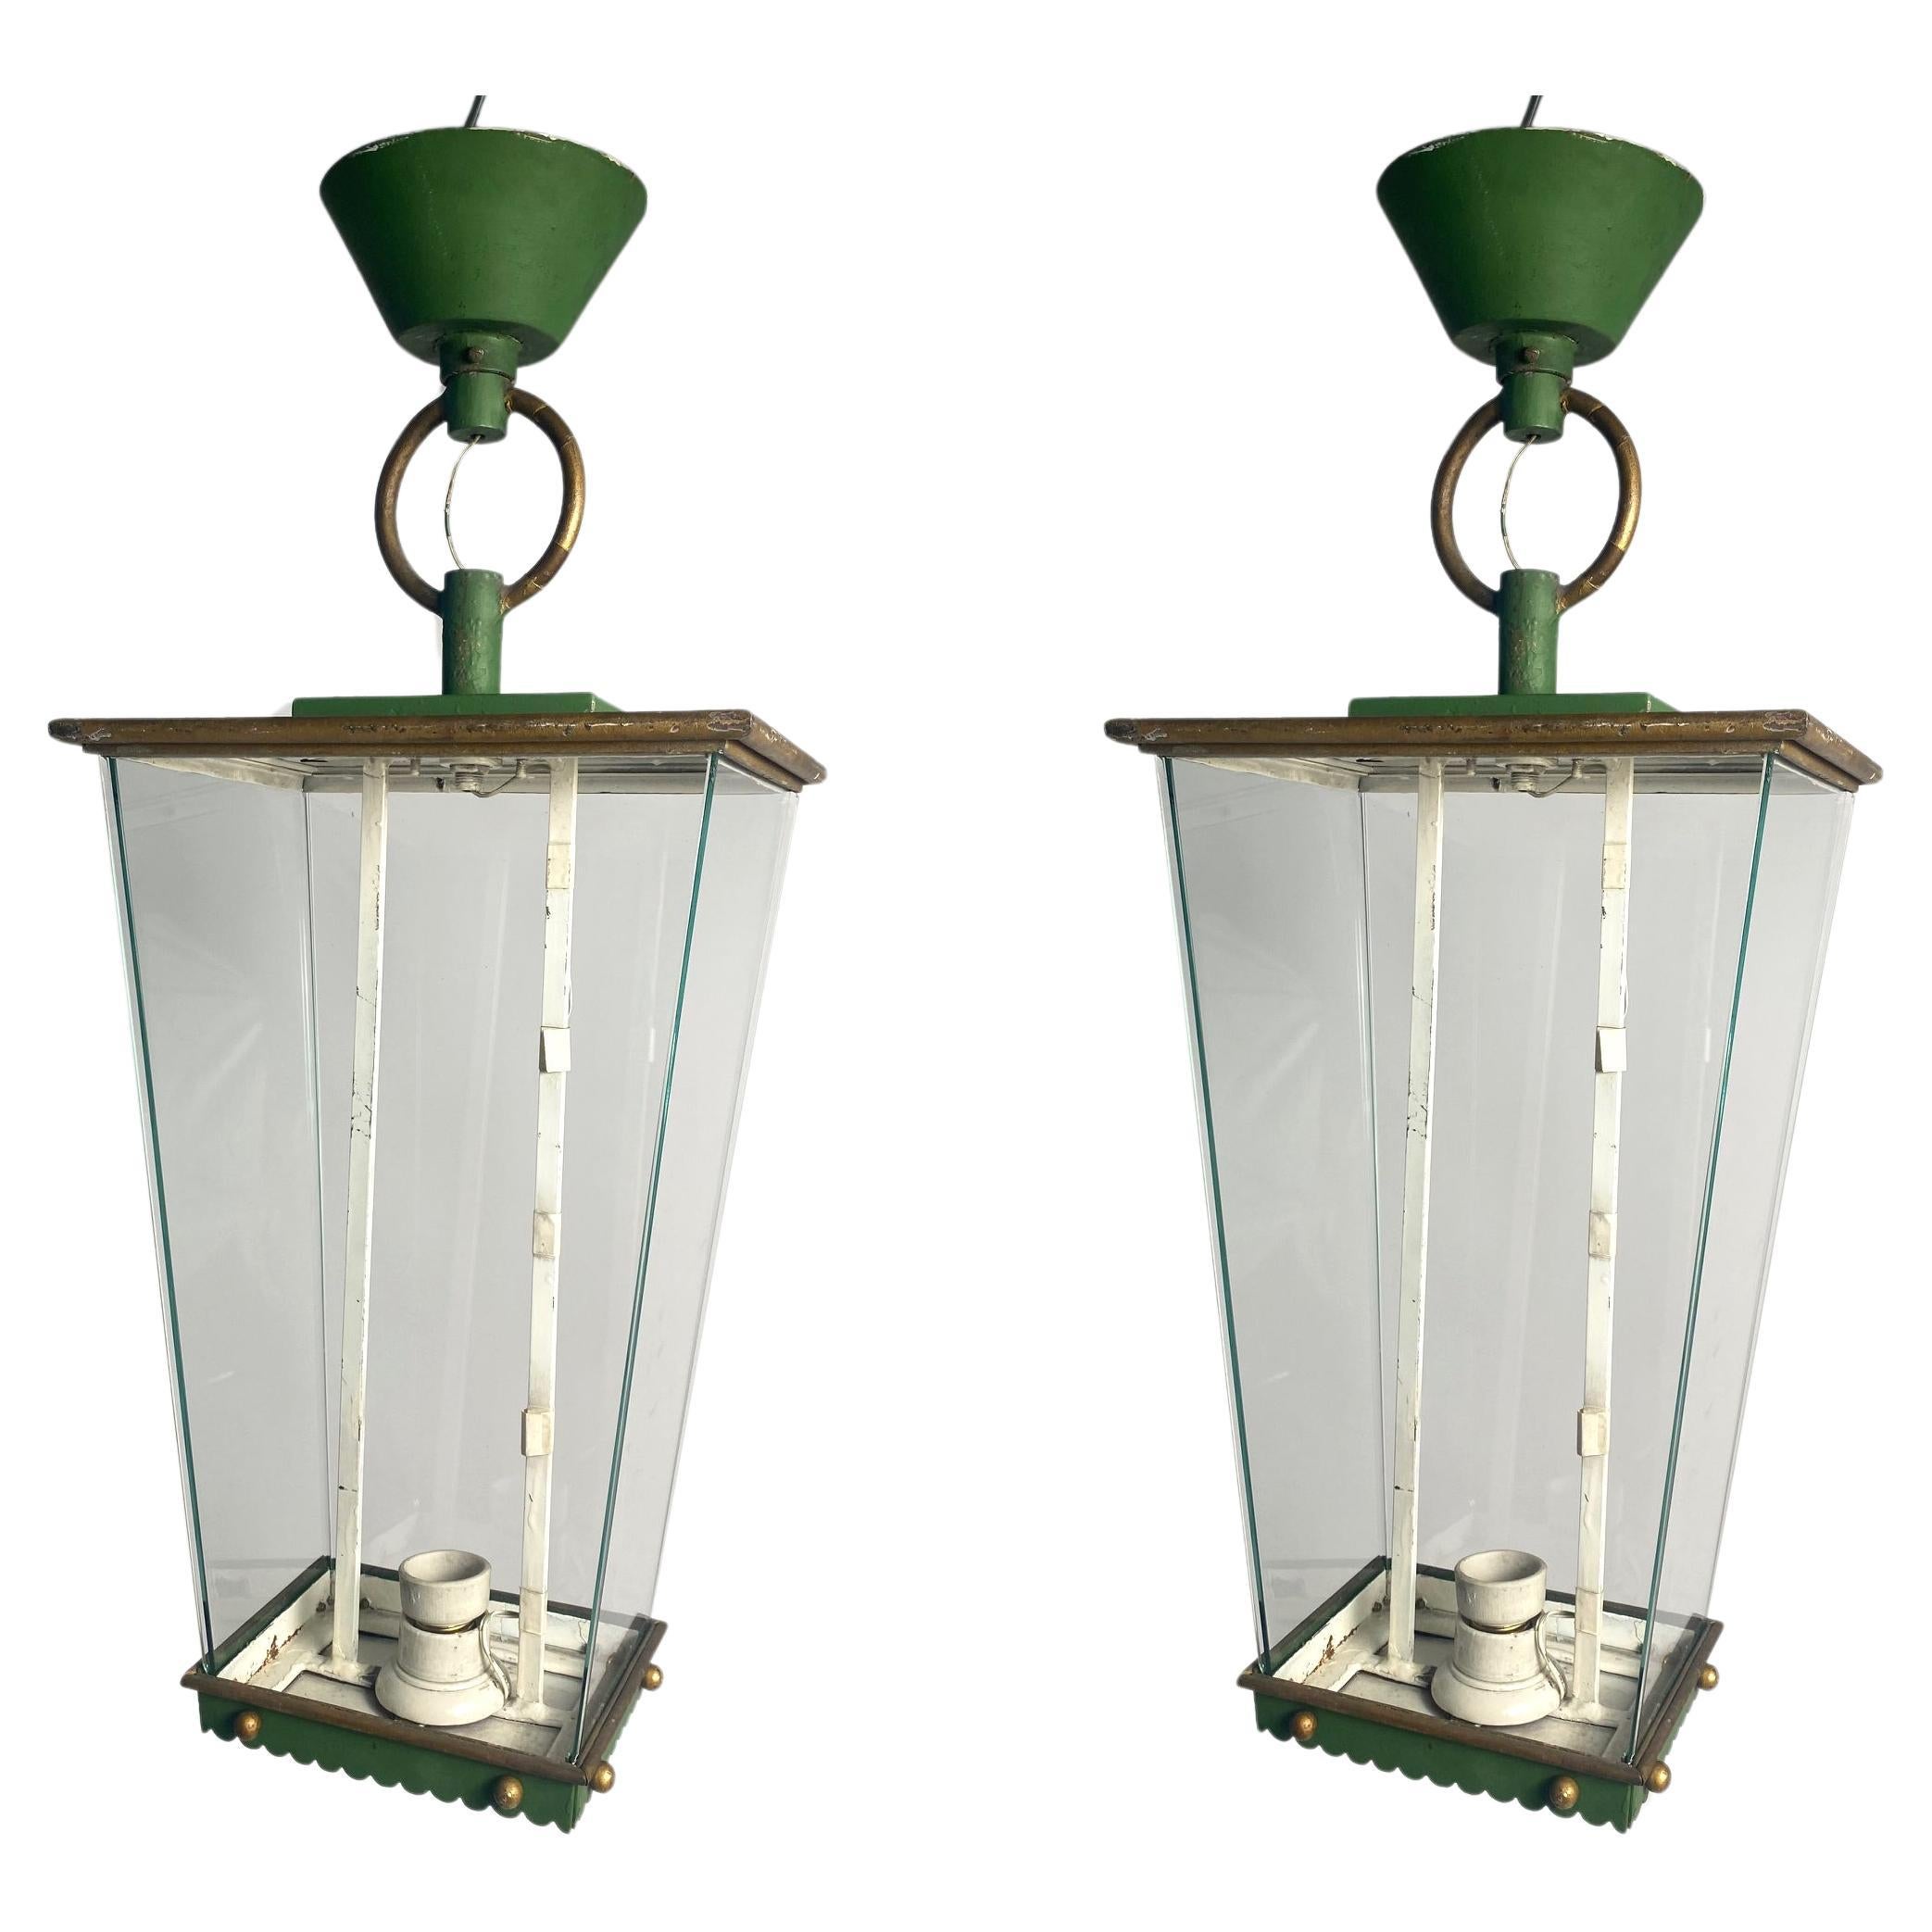 Pair of Monumental Lanterns from an Important Italian hotel. Pietro Chiesa style